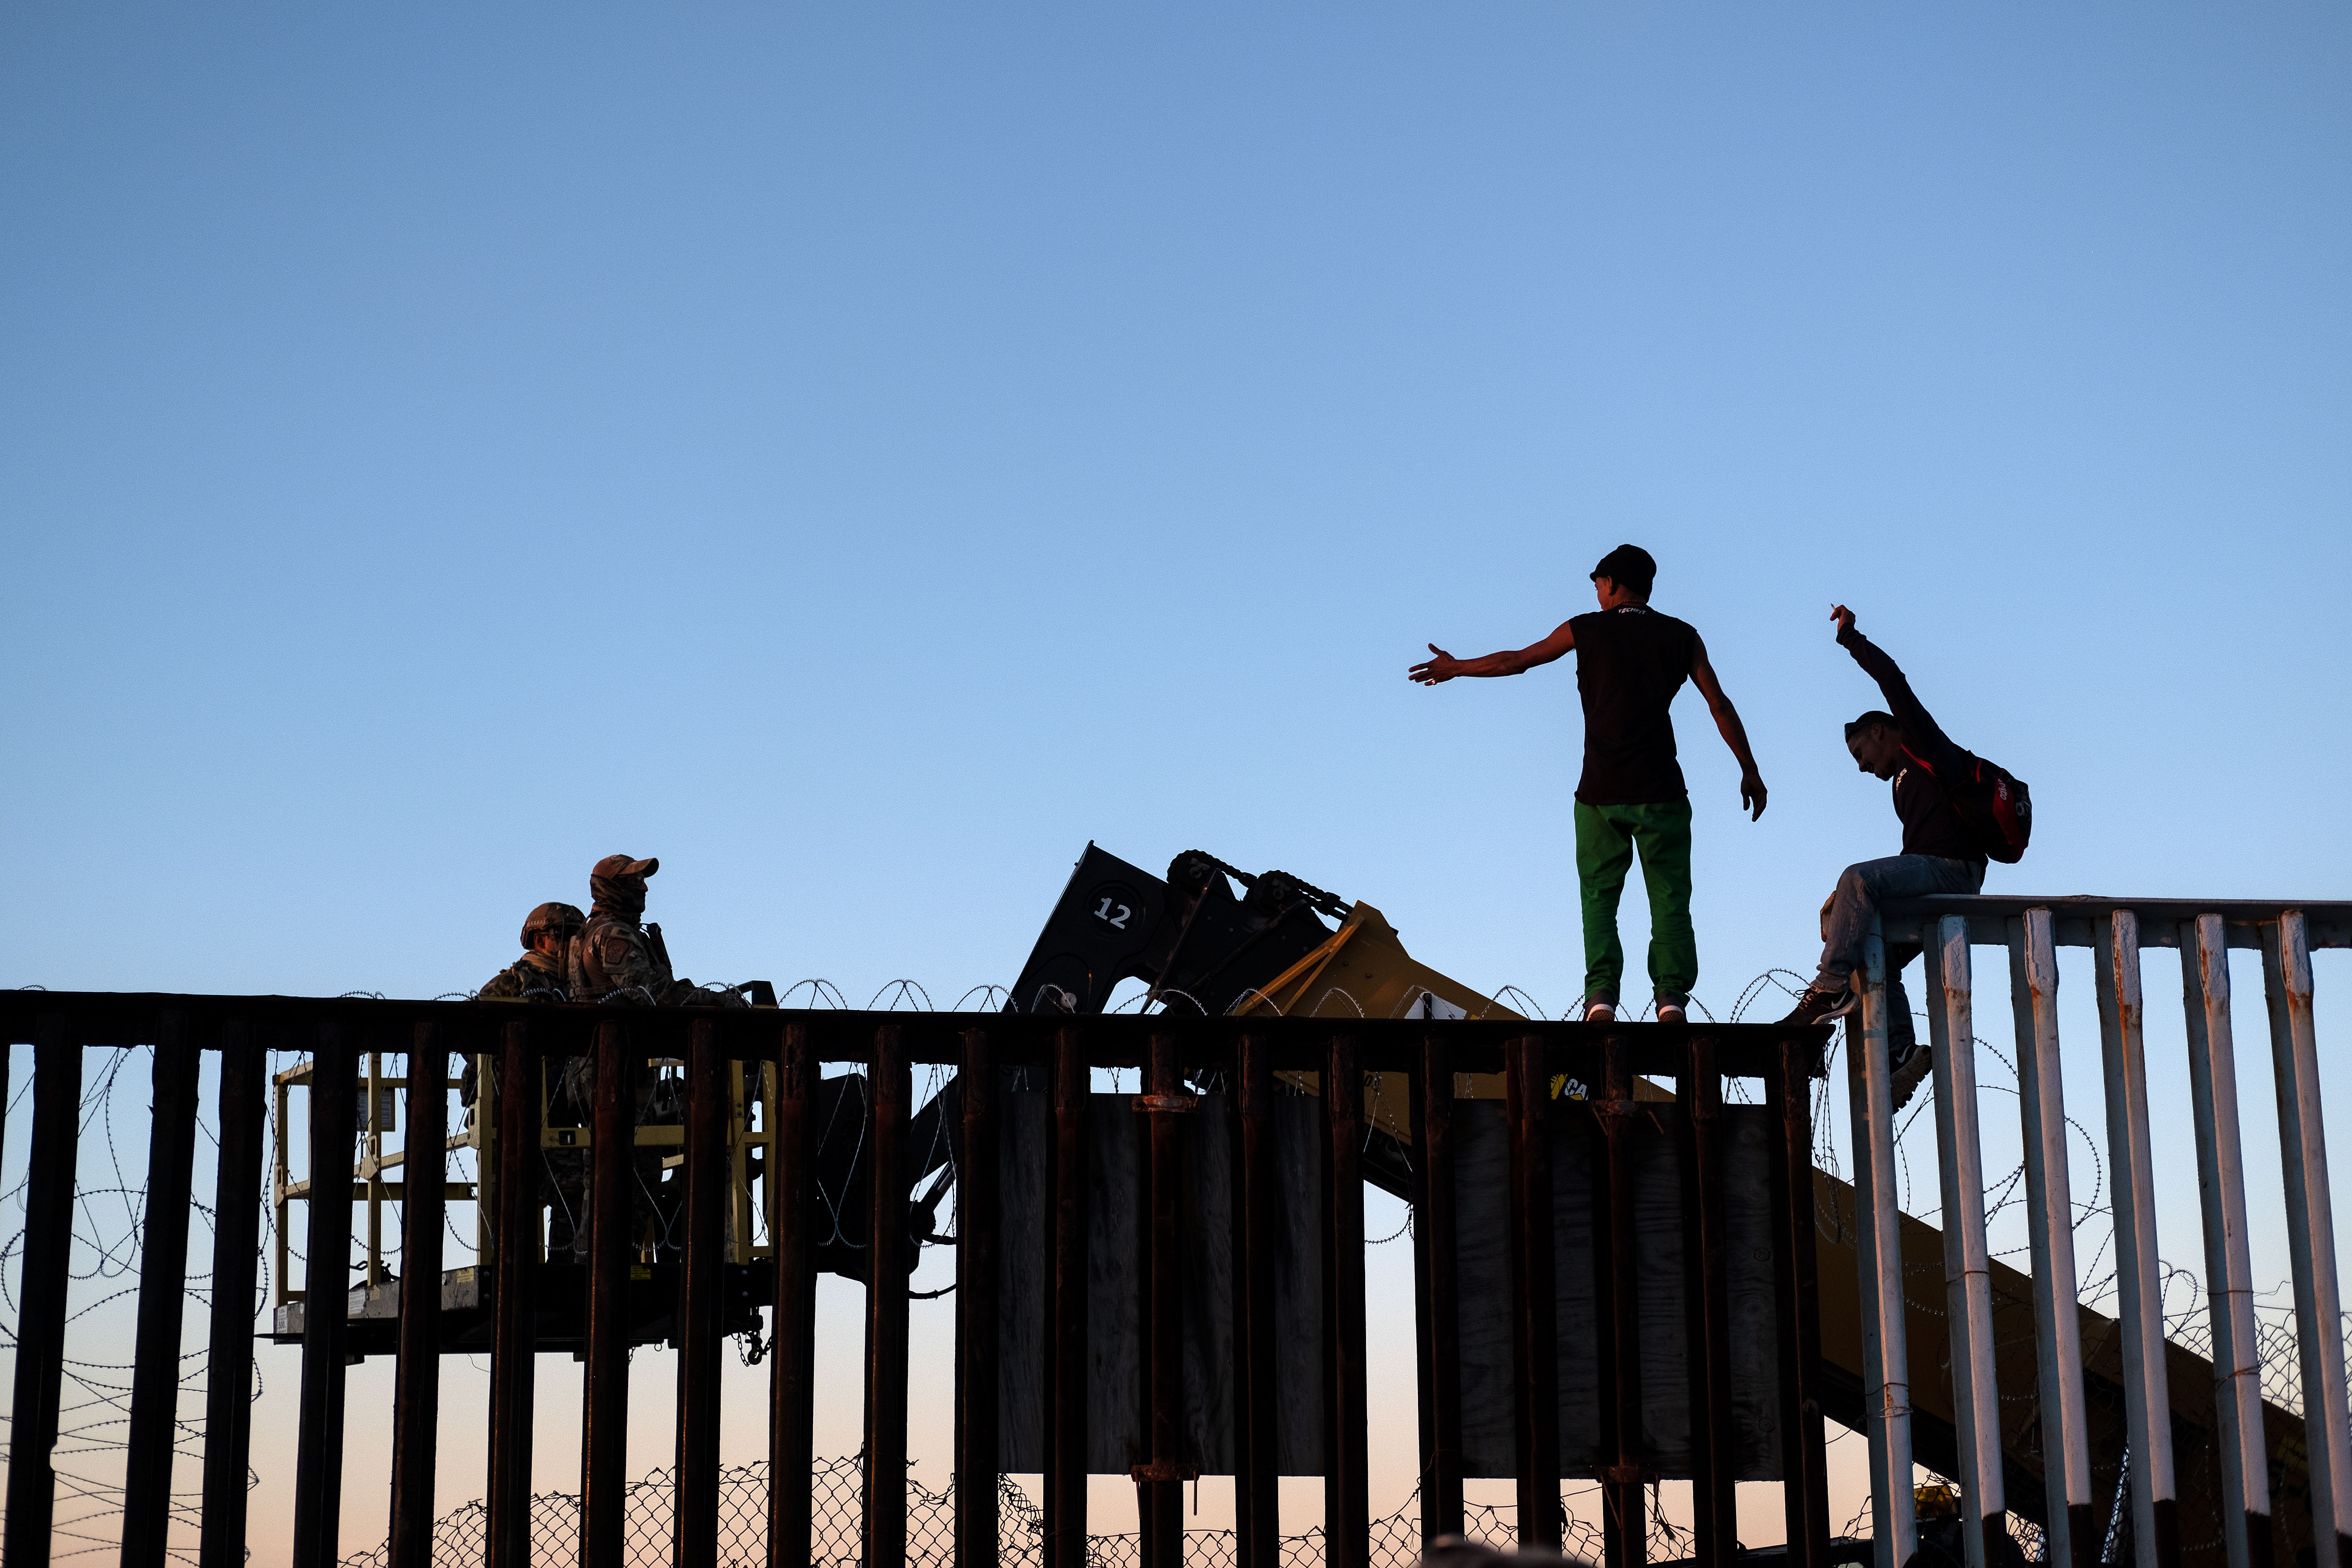 TOPSHOT - Migrants, who claimed not to be part of the Central American migrants moving towards the United States in hopes of a better life, argue with Defense Department officers after removing the barbed wire on the U.S.-Mexico border fence in Playas de Tijuana, Mexico, on November 14, 2018. - US Defence Secretary Jim Mattis said Tuesday he will visit the US-Mexico border, where thousands of active-duty soldiers have been deployed to help border police prepare for the arrival of a "caravan" of migrants. (Photo by Guillermo Arias / AFP)